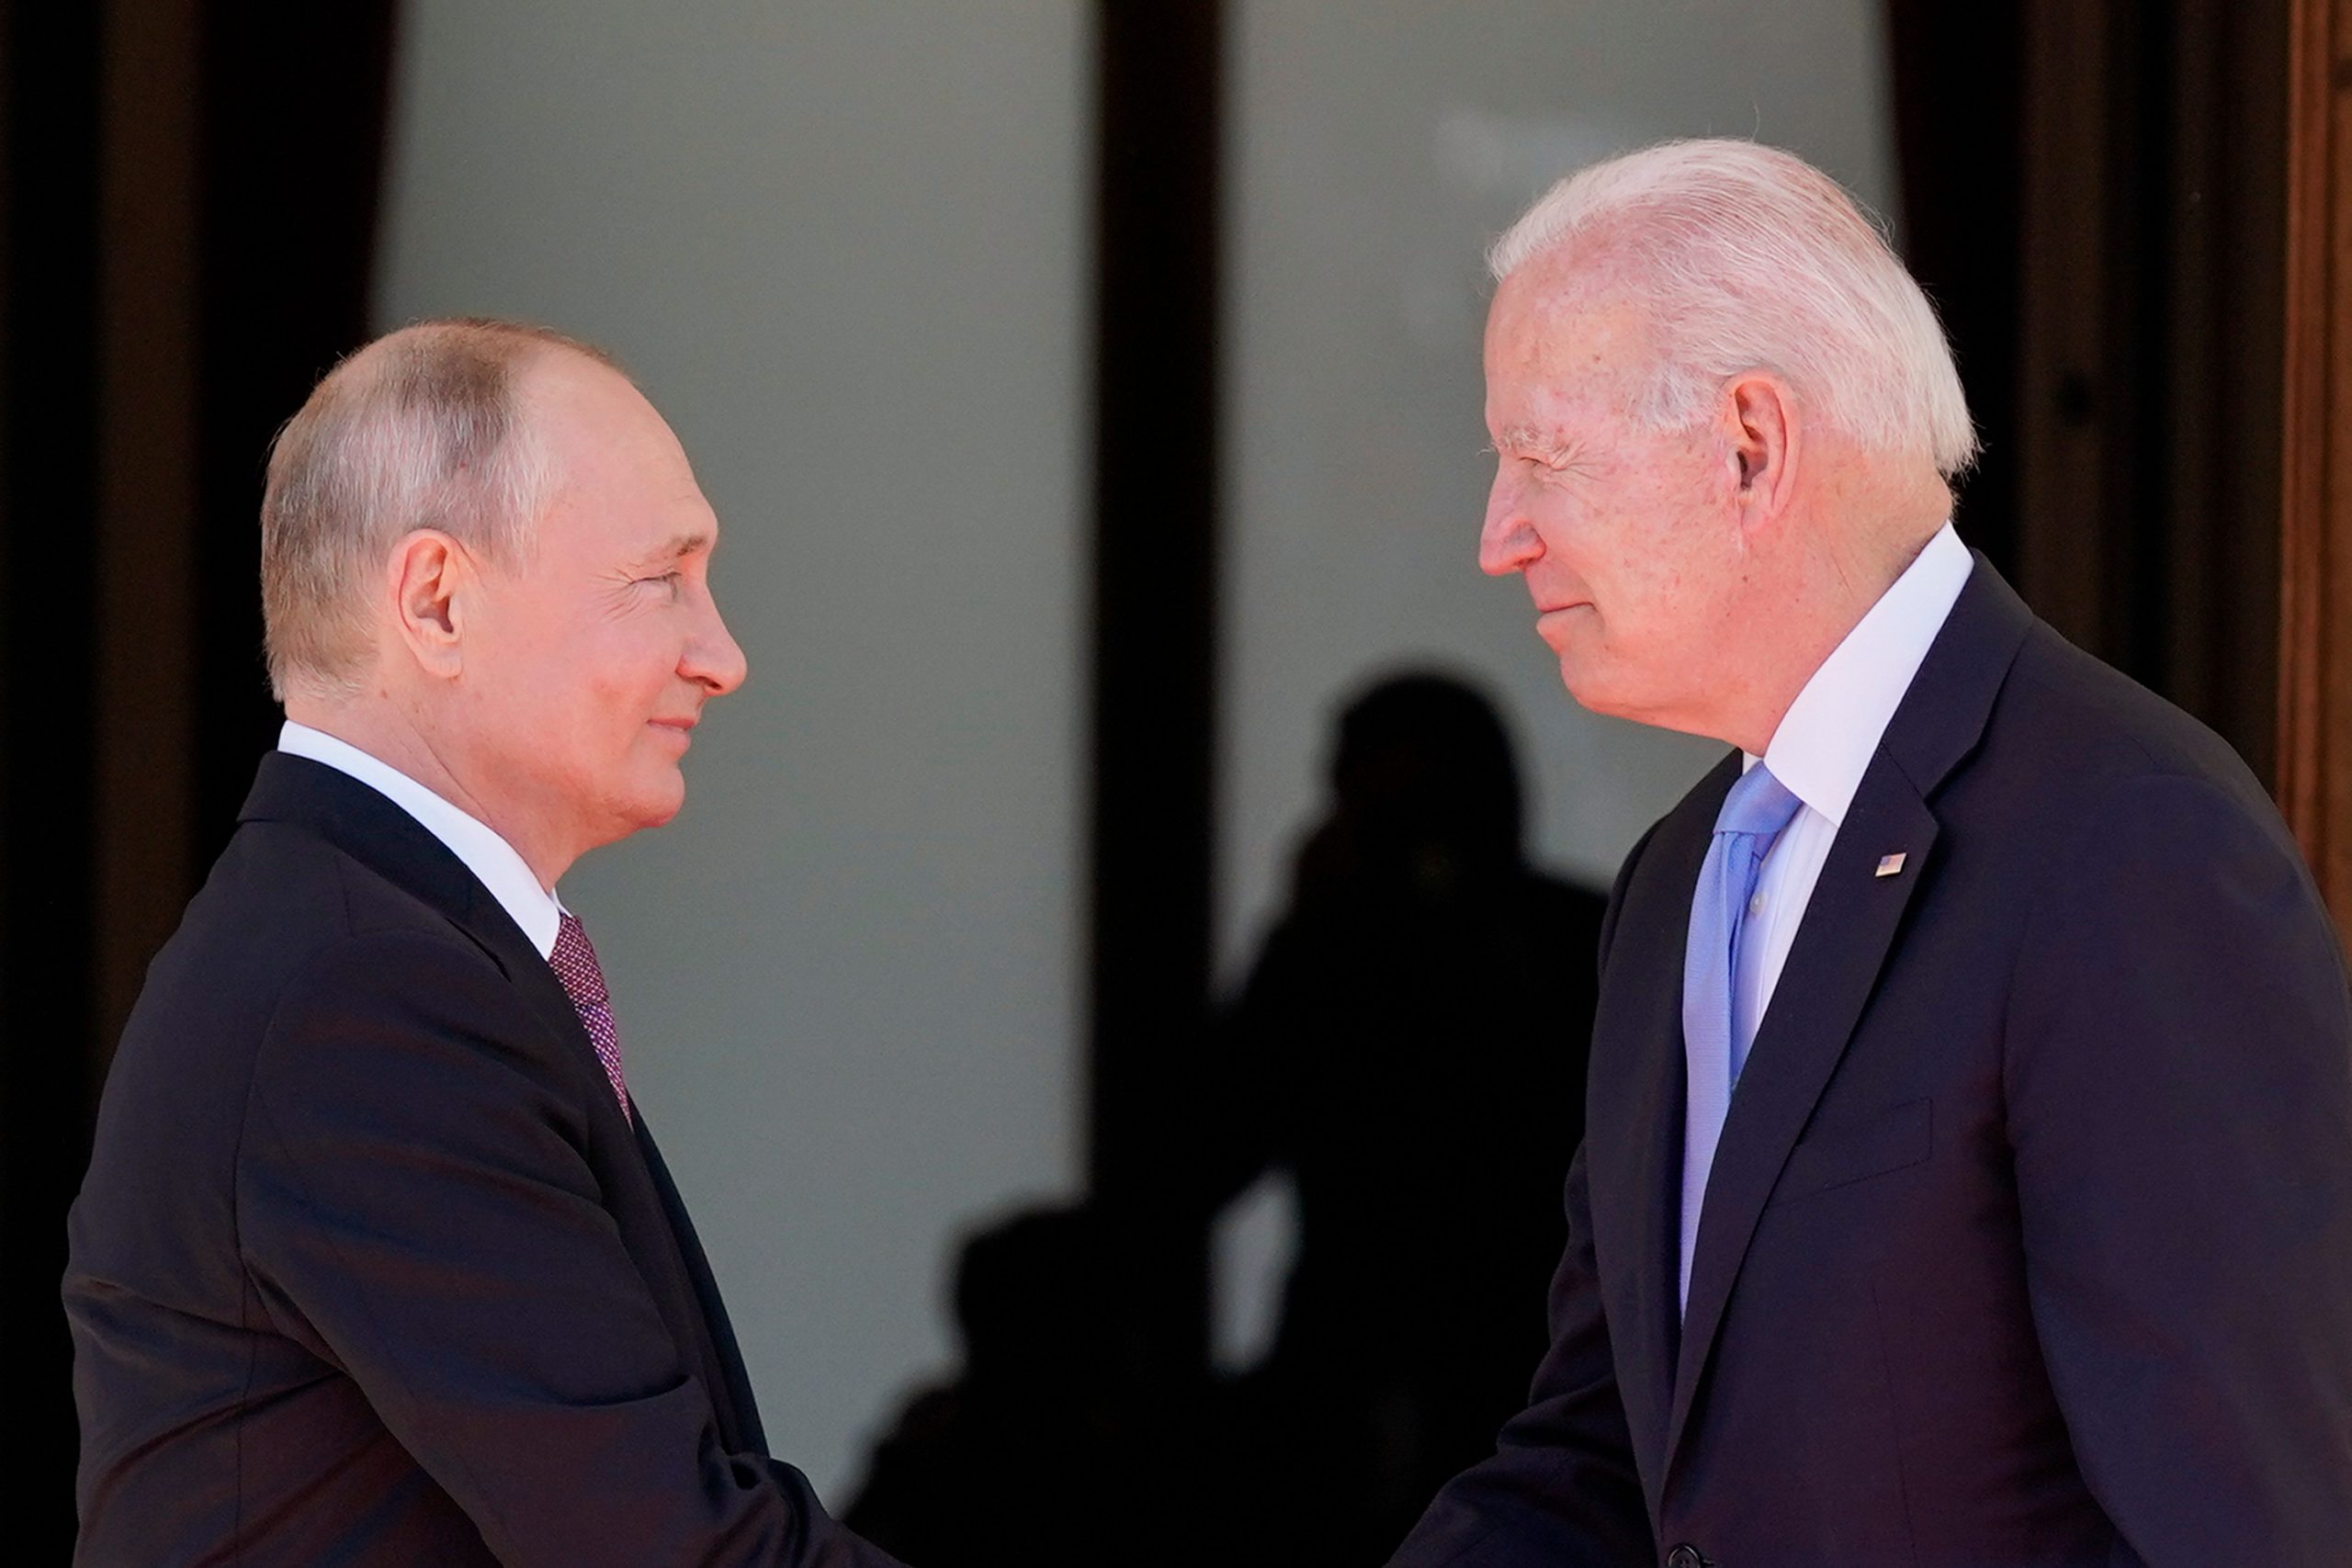 Joe Biden rules out sending troops to Ukraine, threatens Russia with sanctions